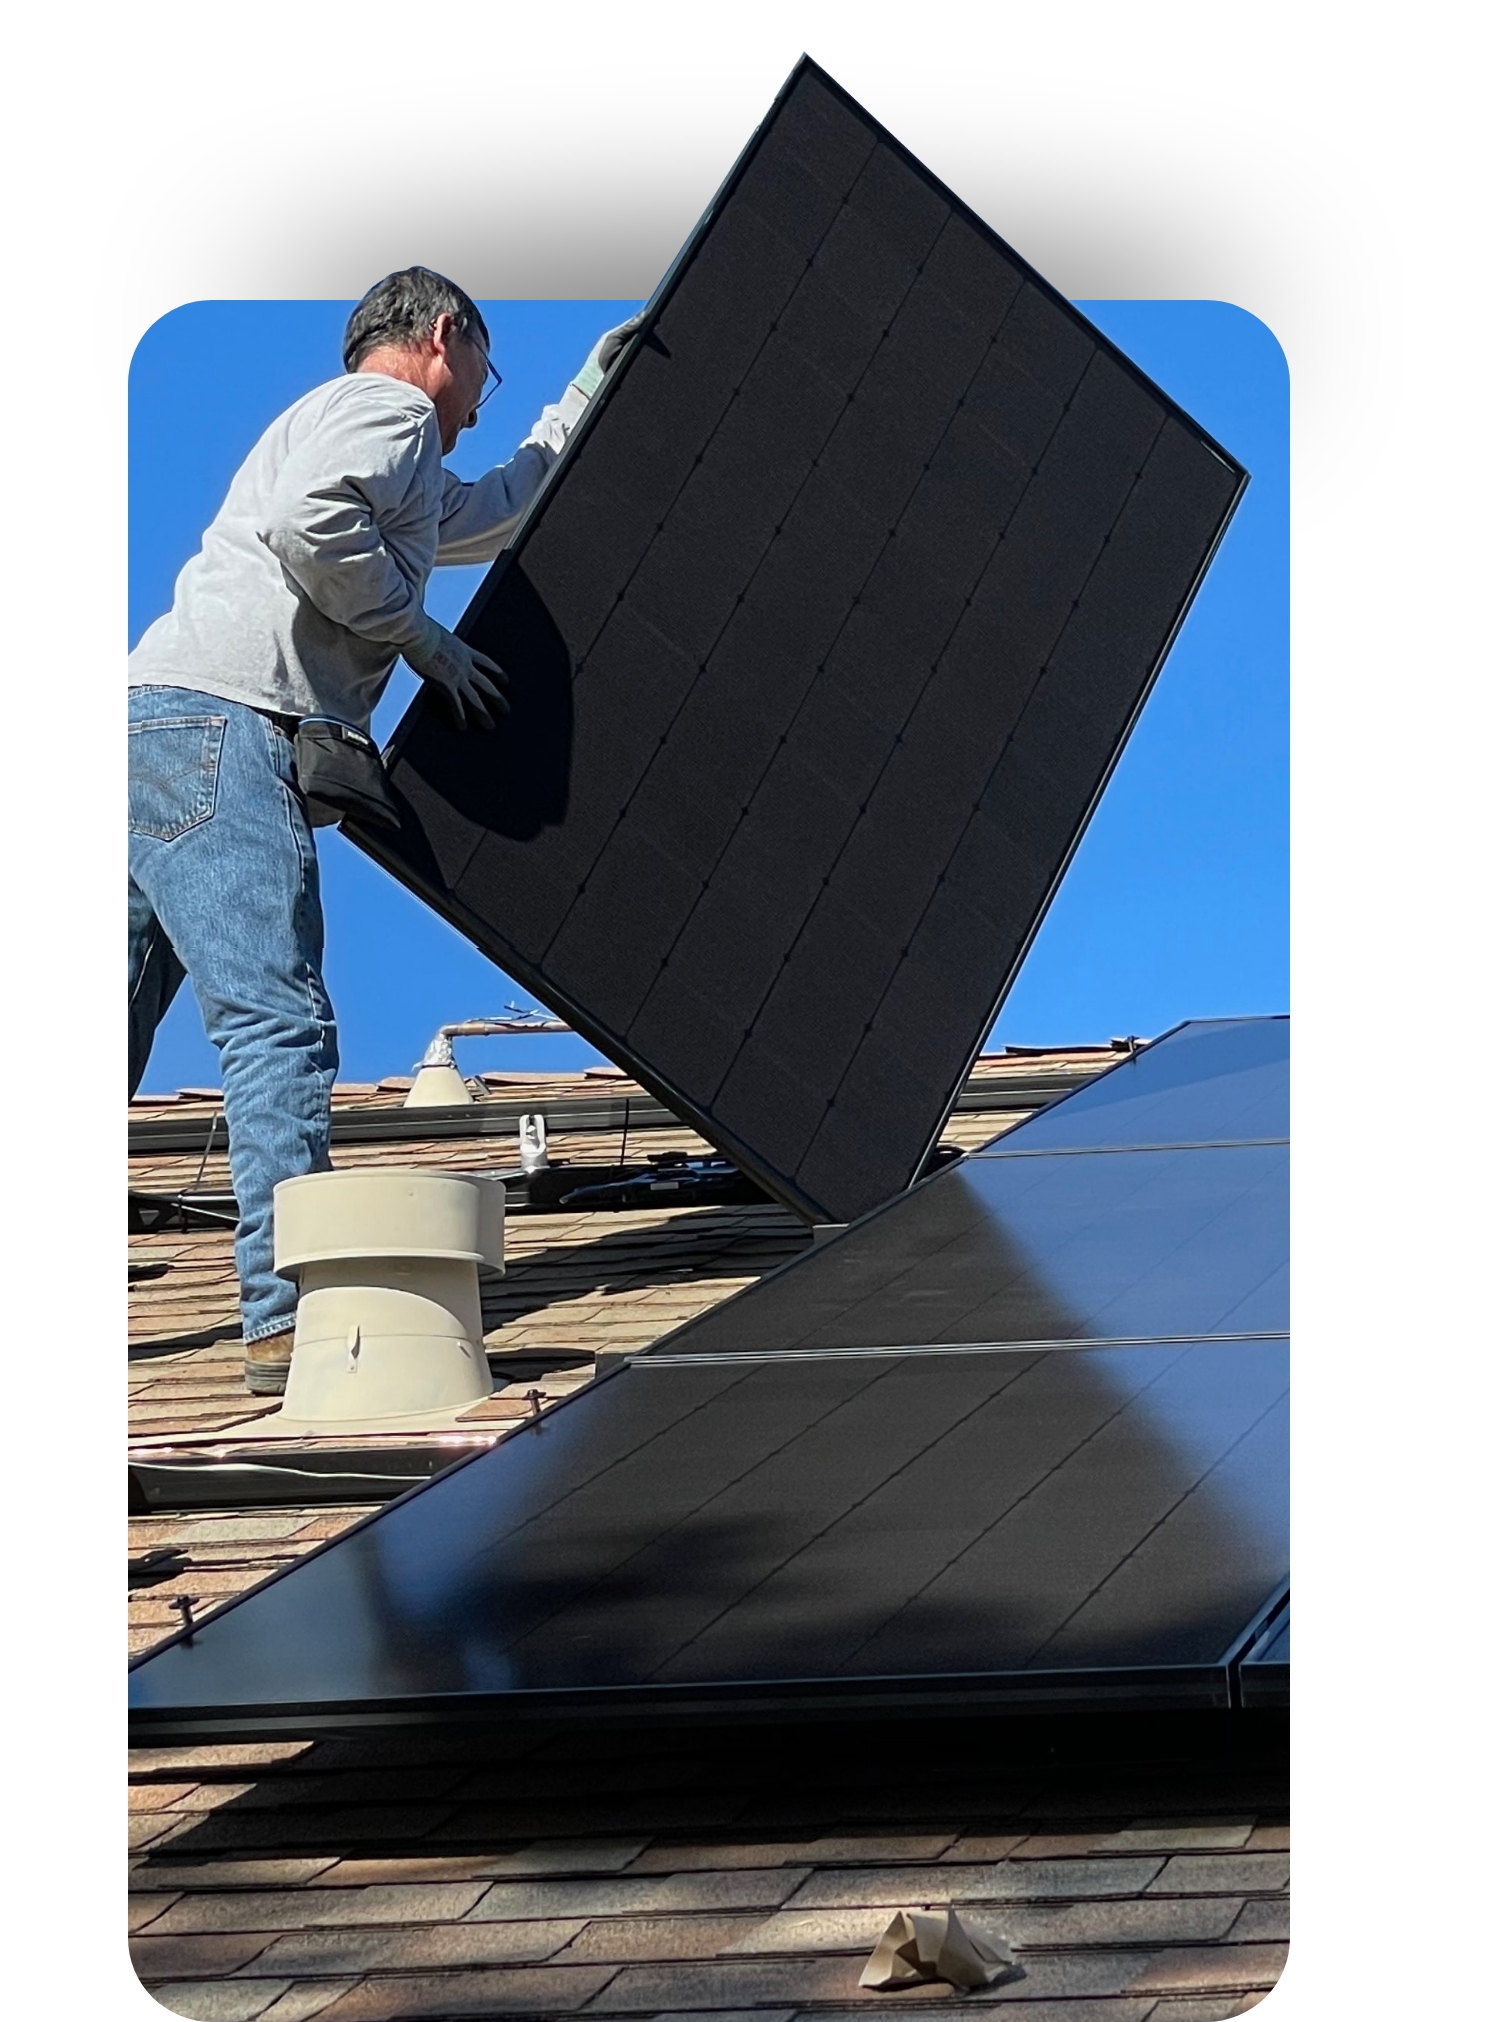 Grand Junction homeowners look to Solar by Peak to Peak for their sustainable energy experts and a solar company they can trust in Grand Junction, CO.